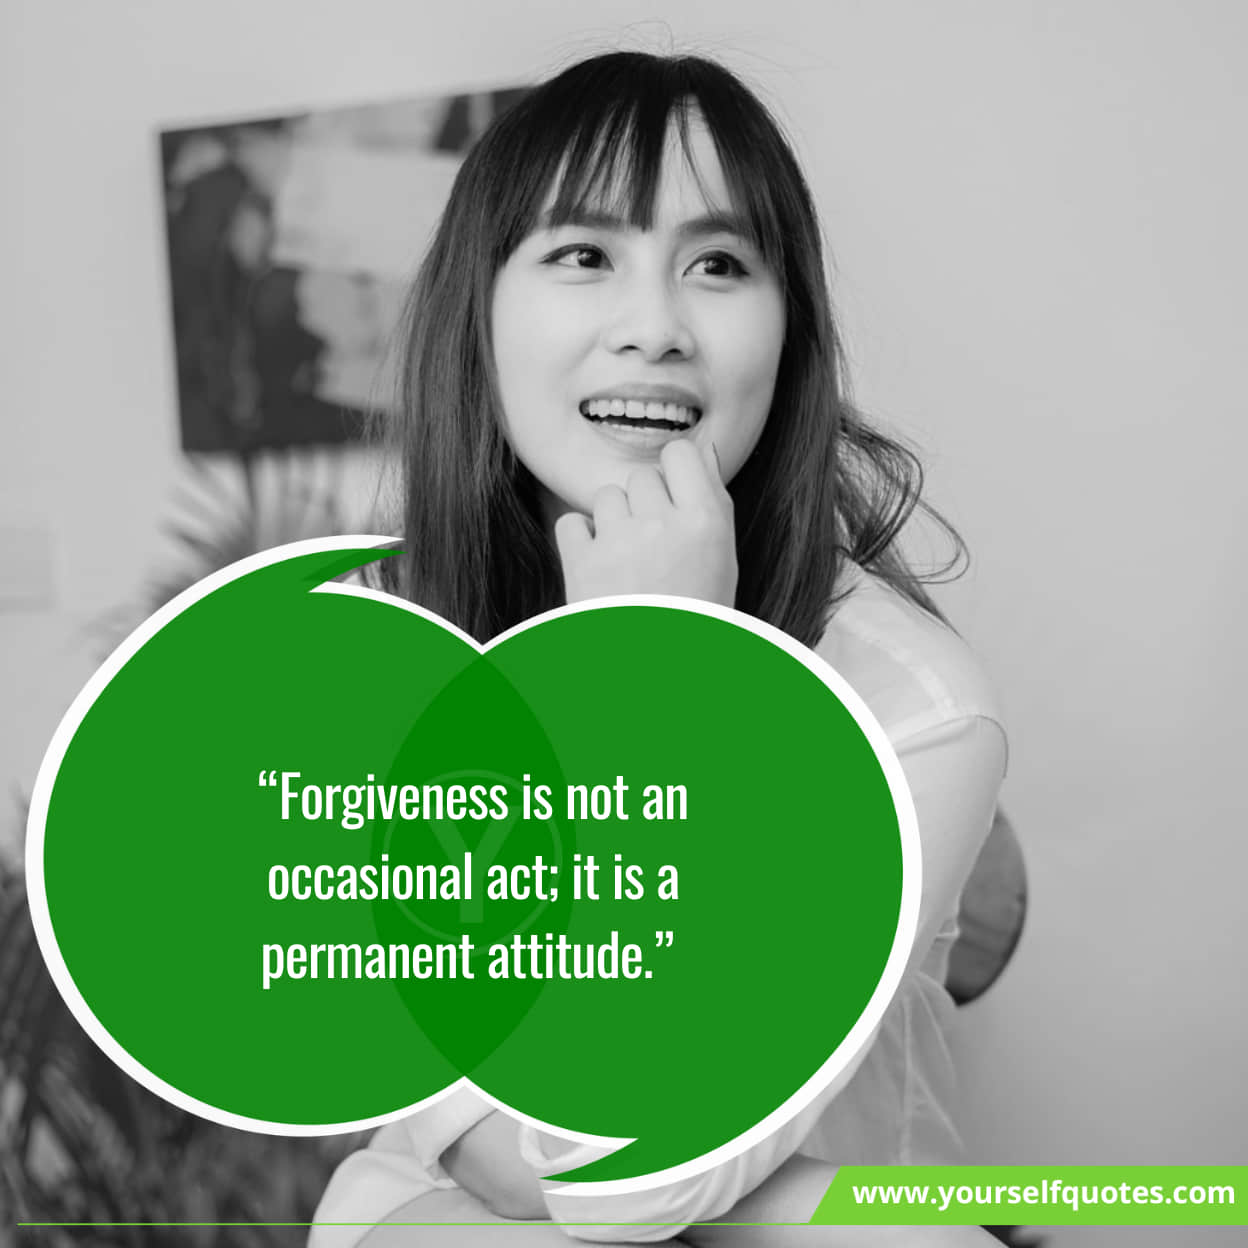 Inspiring Quotes On Forgiveness